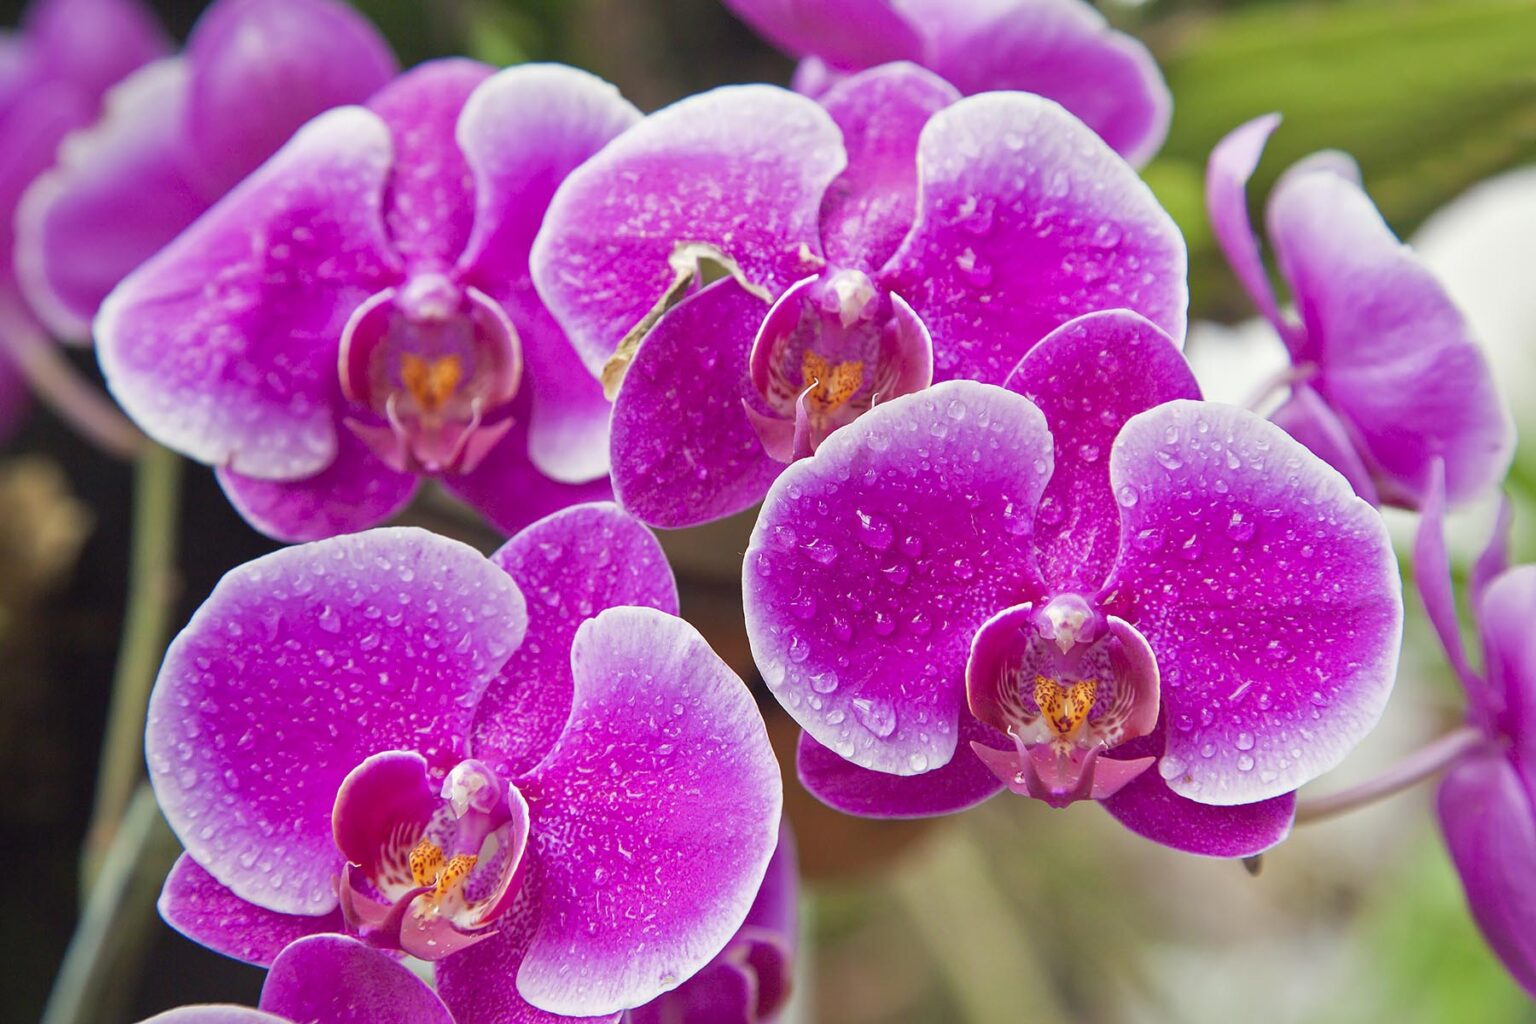 PURPLE PHALAENOPSIS ORCHIDS bloom in the greenhouse at the BOTANICAL GARDEN UBUD - BALI, INDONESIA